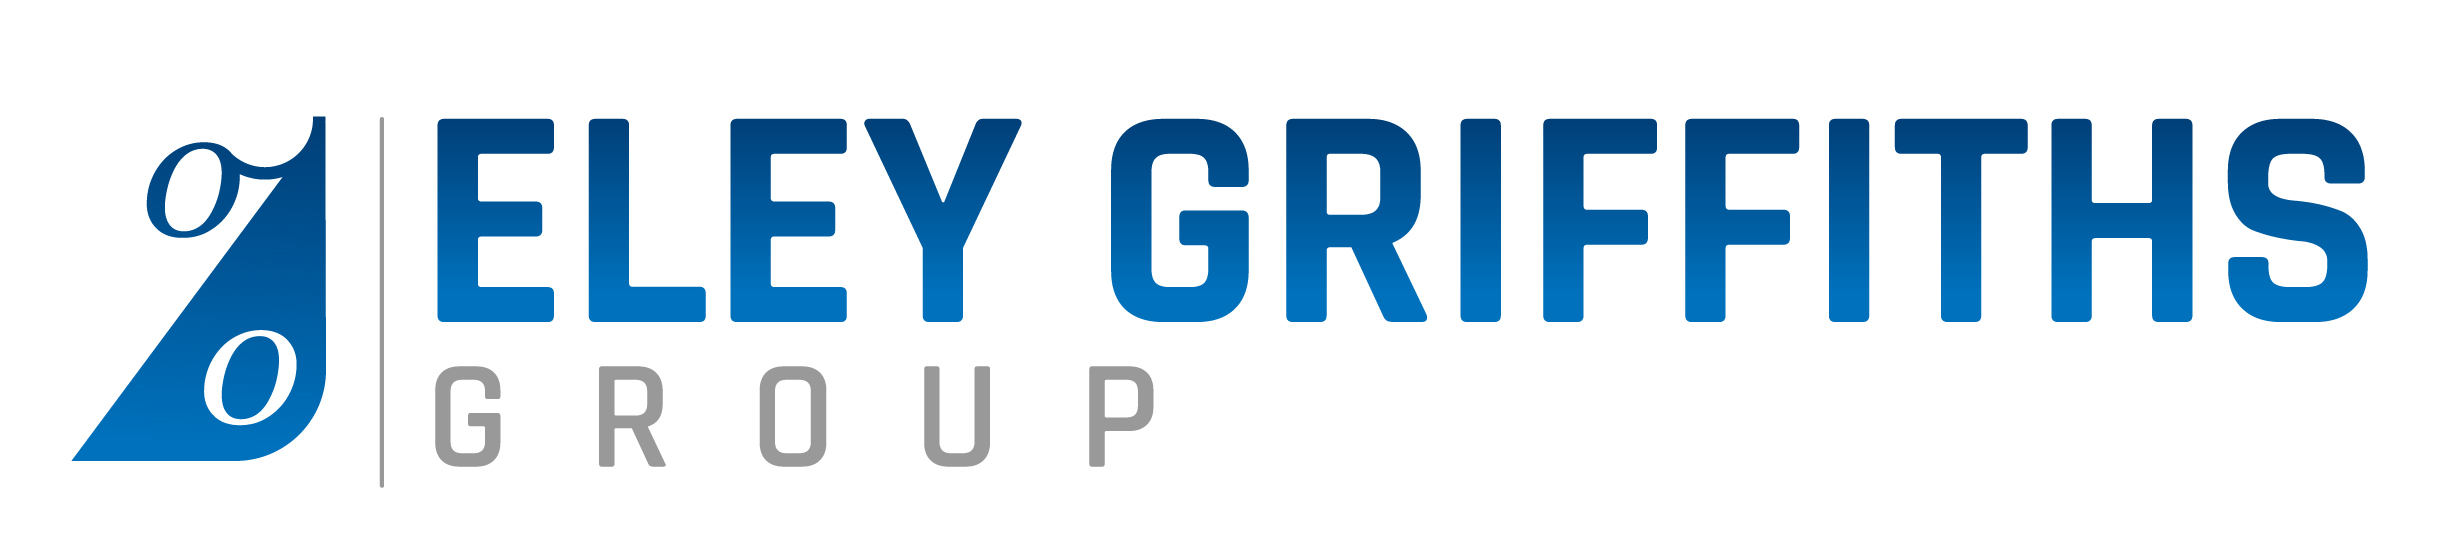 Welcome to Eley Griffiths Group Web Portal